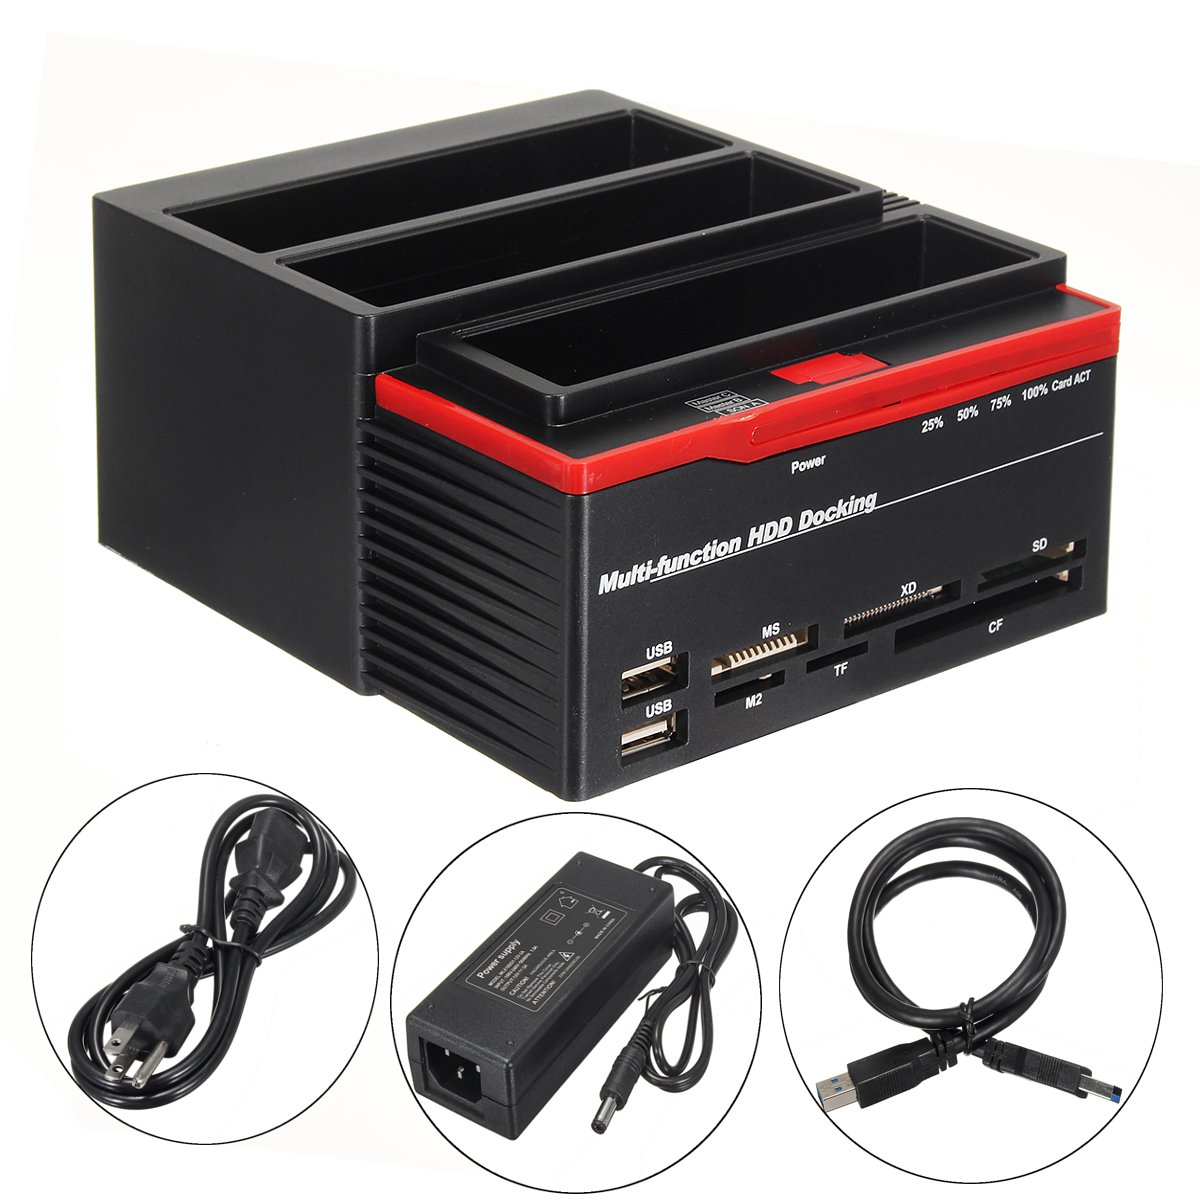 

US 2.5"3.5" ALL In One USB3.0 To SATA IDE HDD SSD Hard Drive Docking Station Offline Clone Card Reader Hub